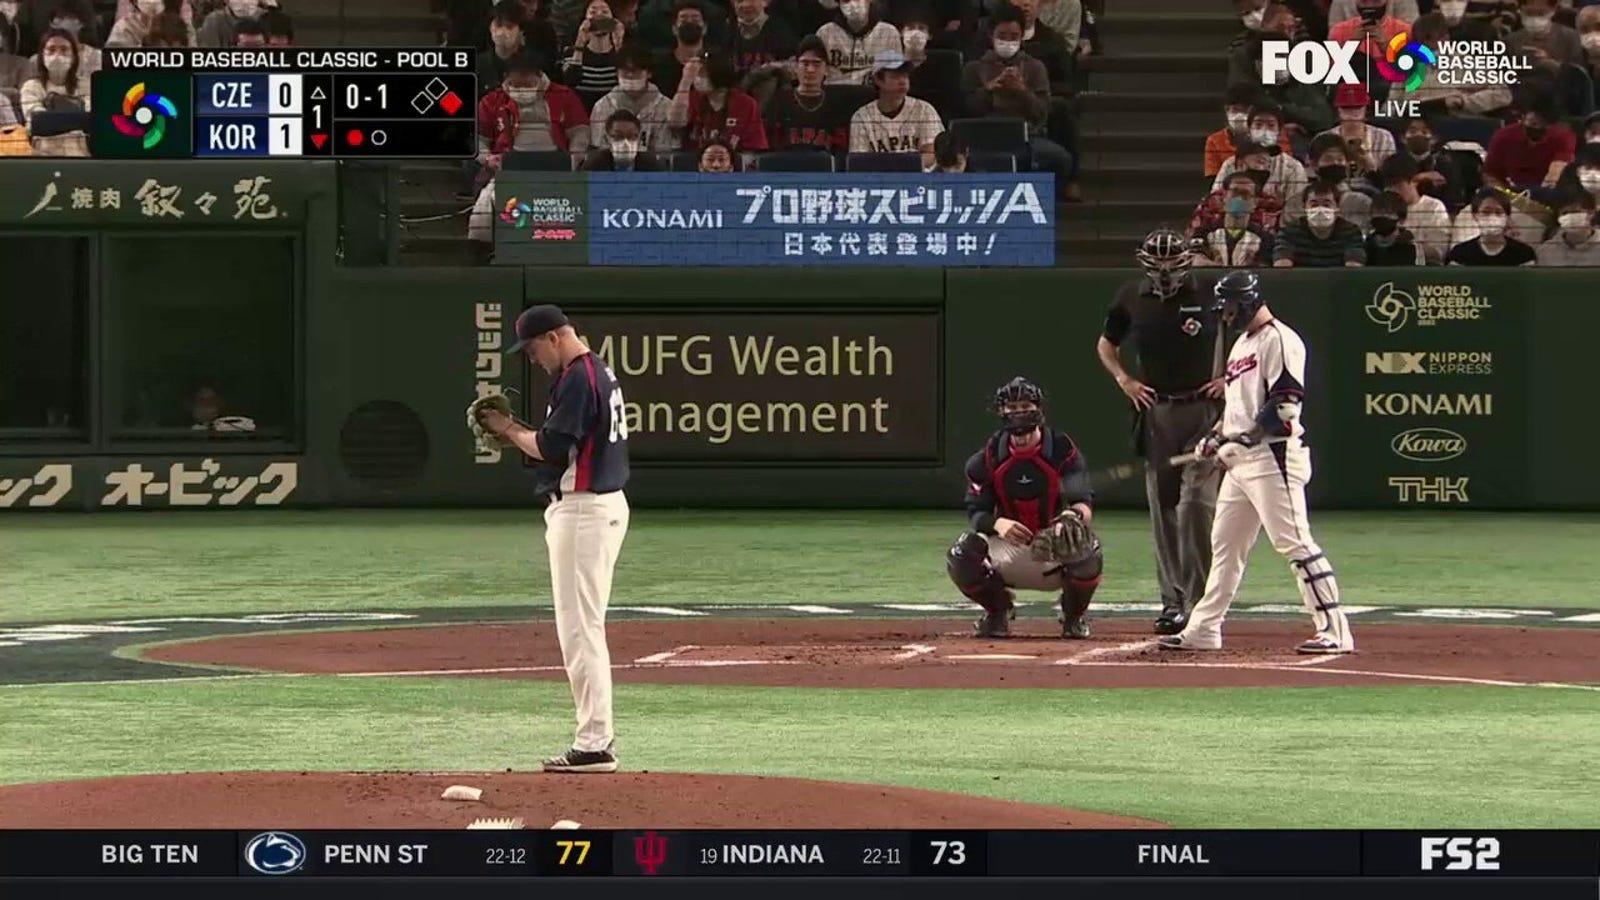 Korea's Jung Hoo Lee lines an RBI single to center field, scoring Kunwoo Park for a 1-0 lead over the Czech Republic